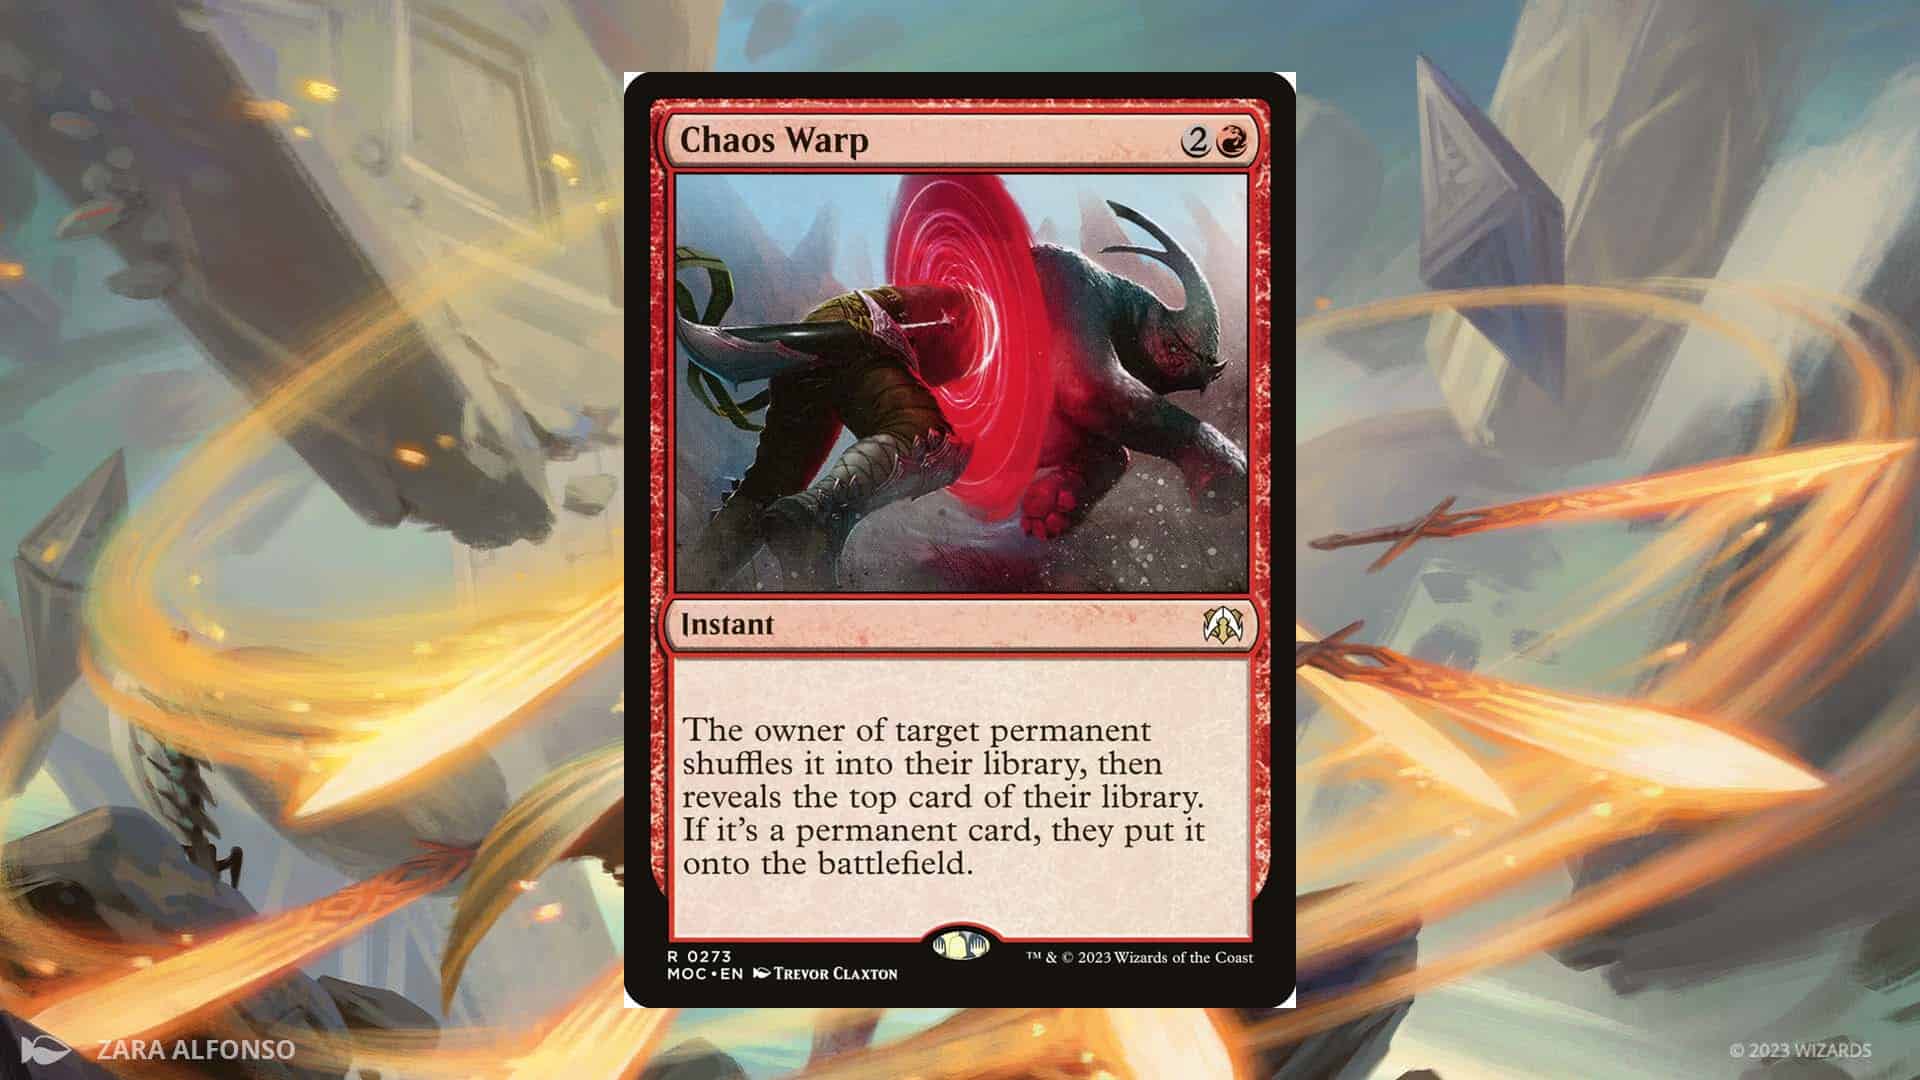 Picture of Chaos Warp from Magic: the Gathering